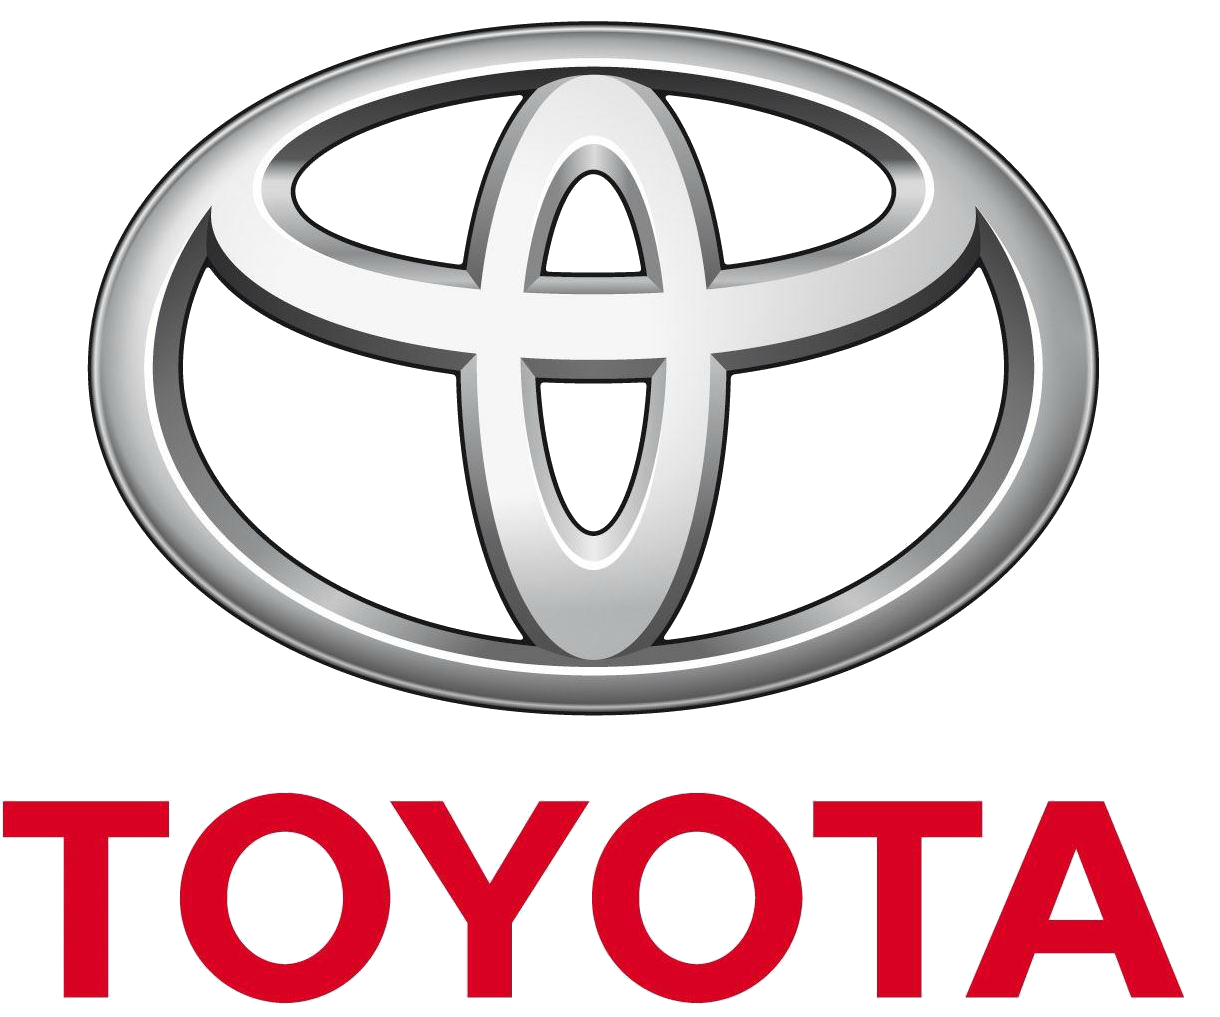 the meaning of toyota #7